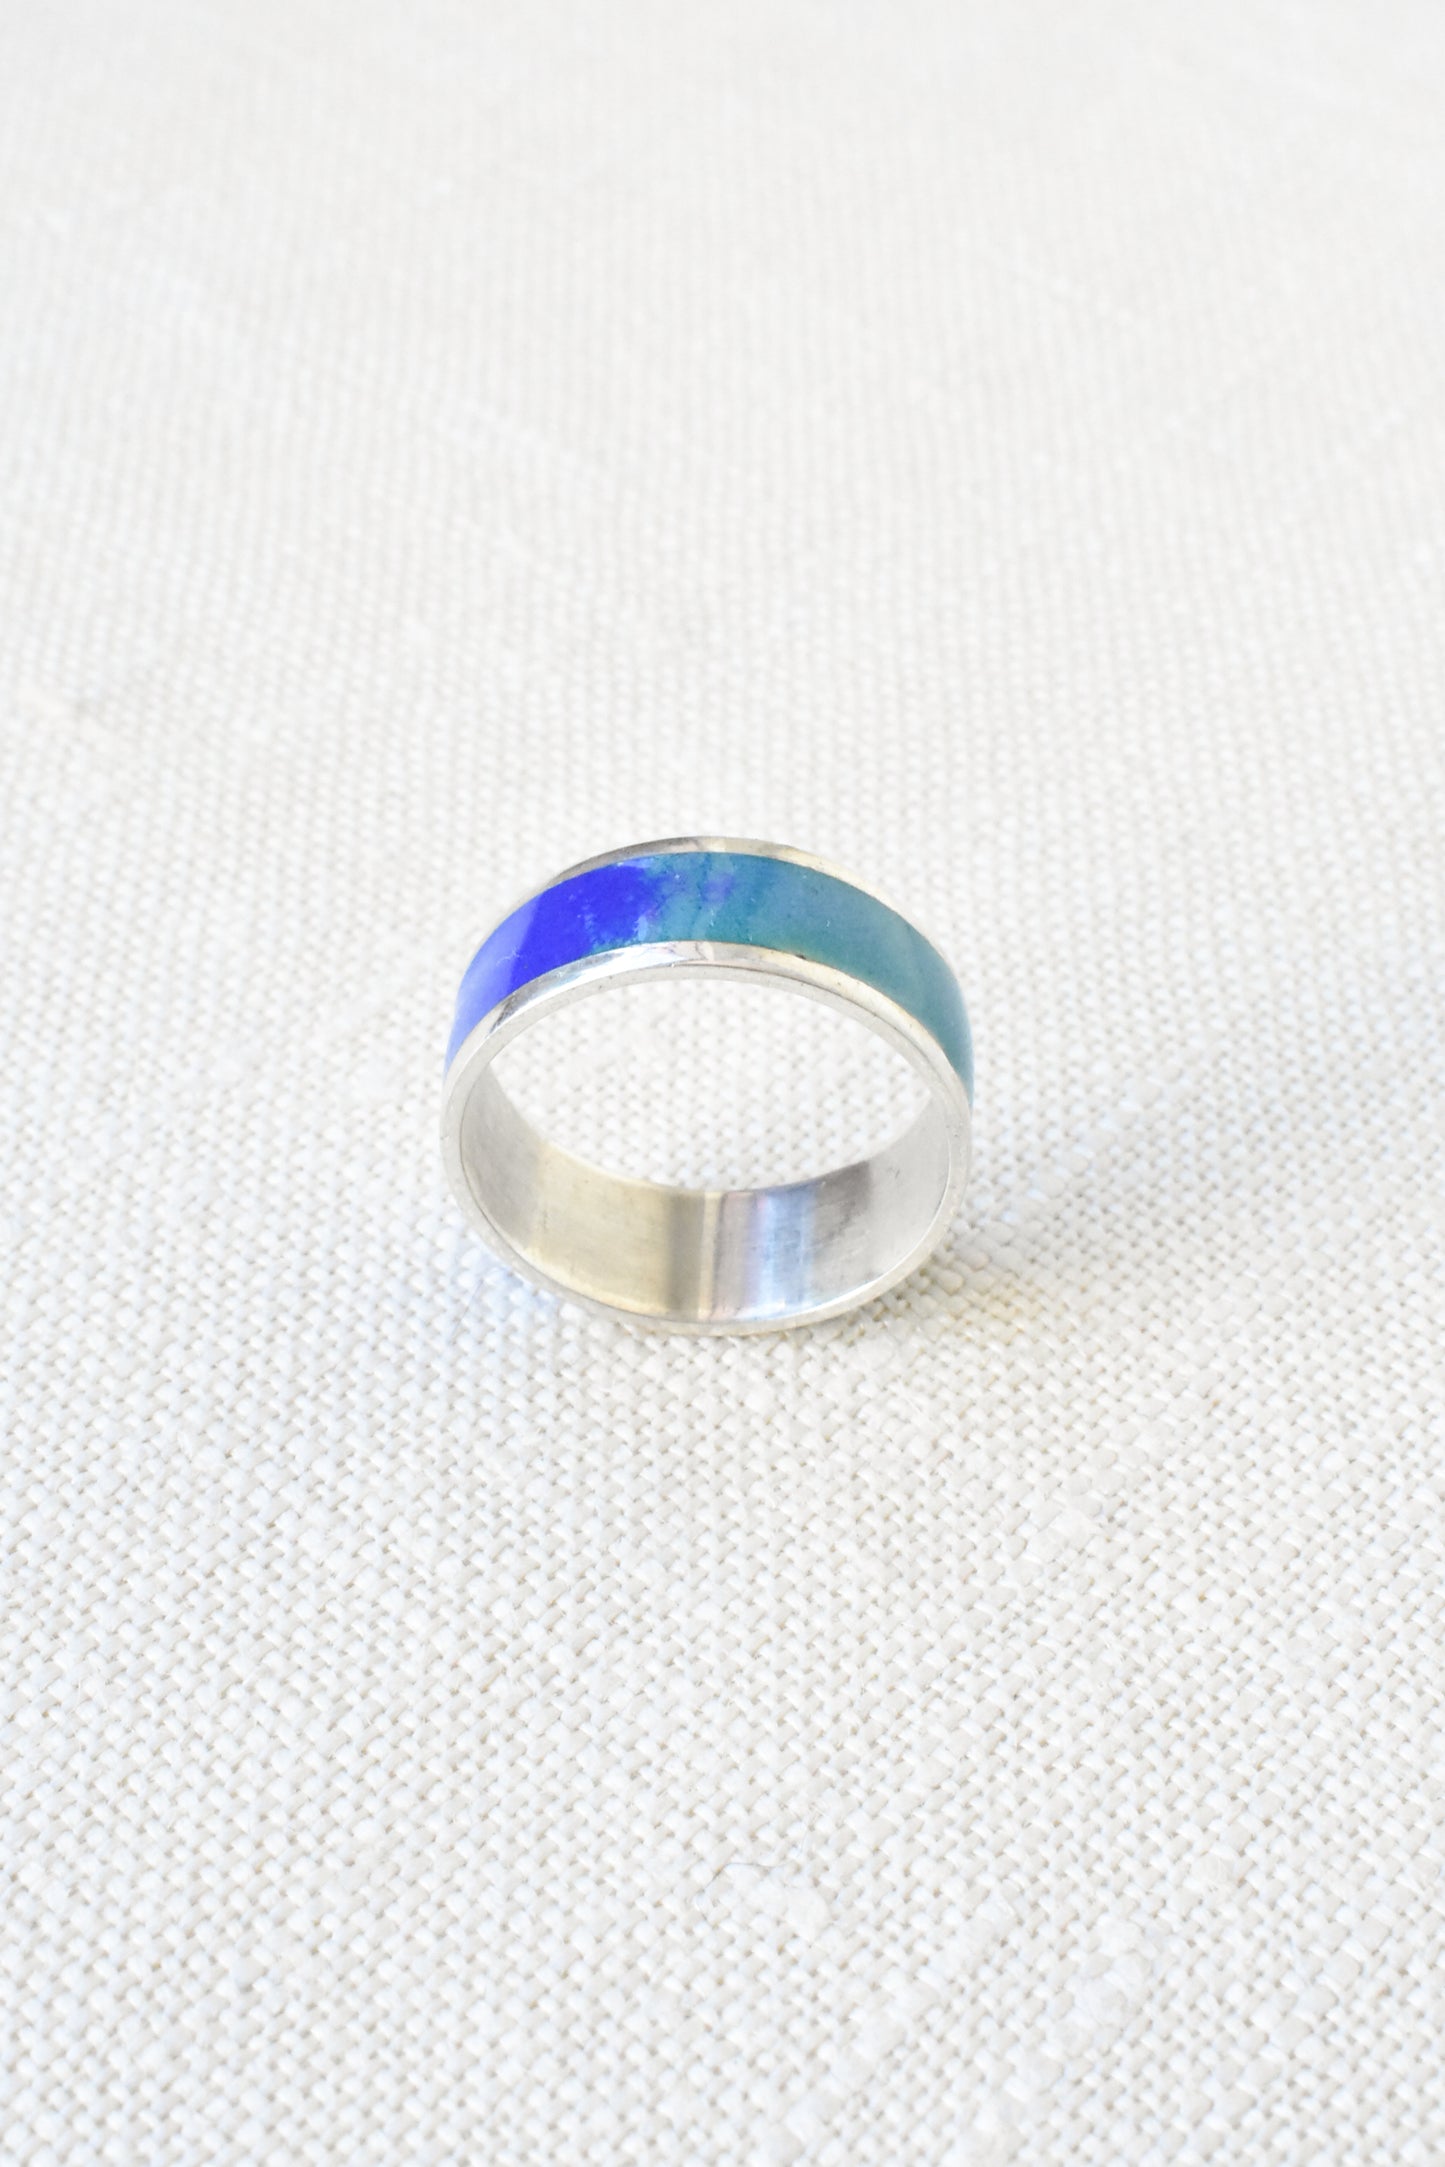 Bob Wyber sterling silver and enamel ring, NEW